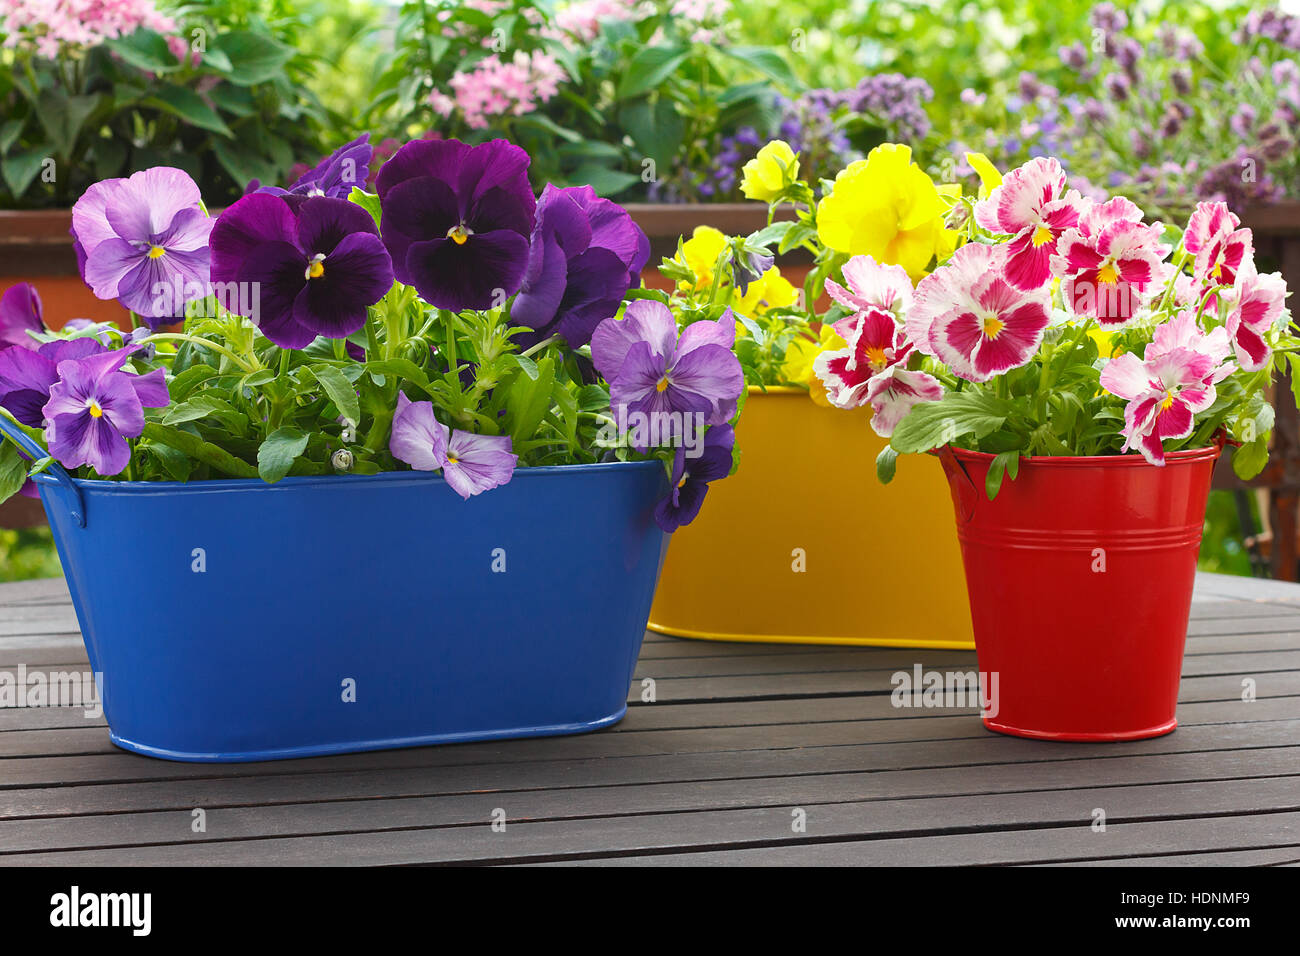 Purple, blue, red and yellow pansy flowers in 3 corresponding pots on a balcony table, copyspace, green background Stock Photo